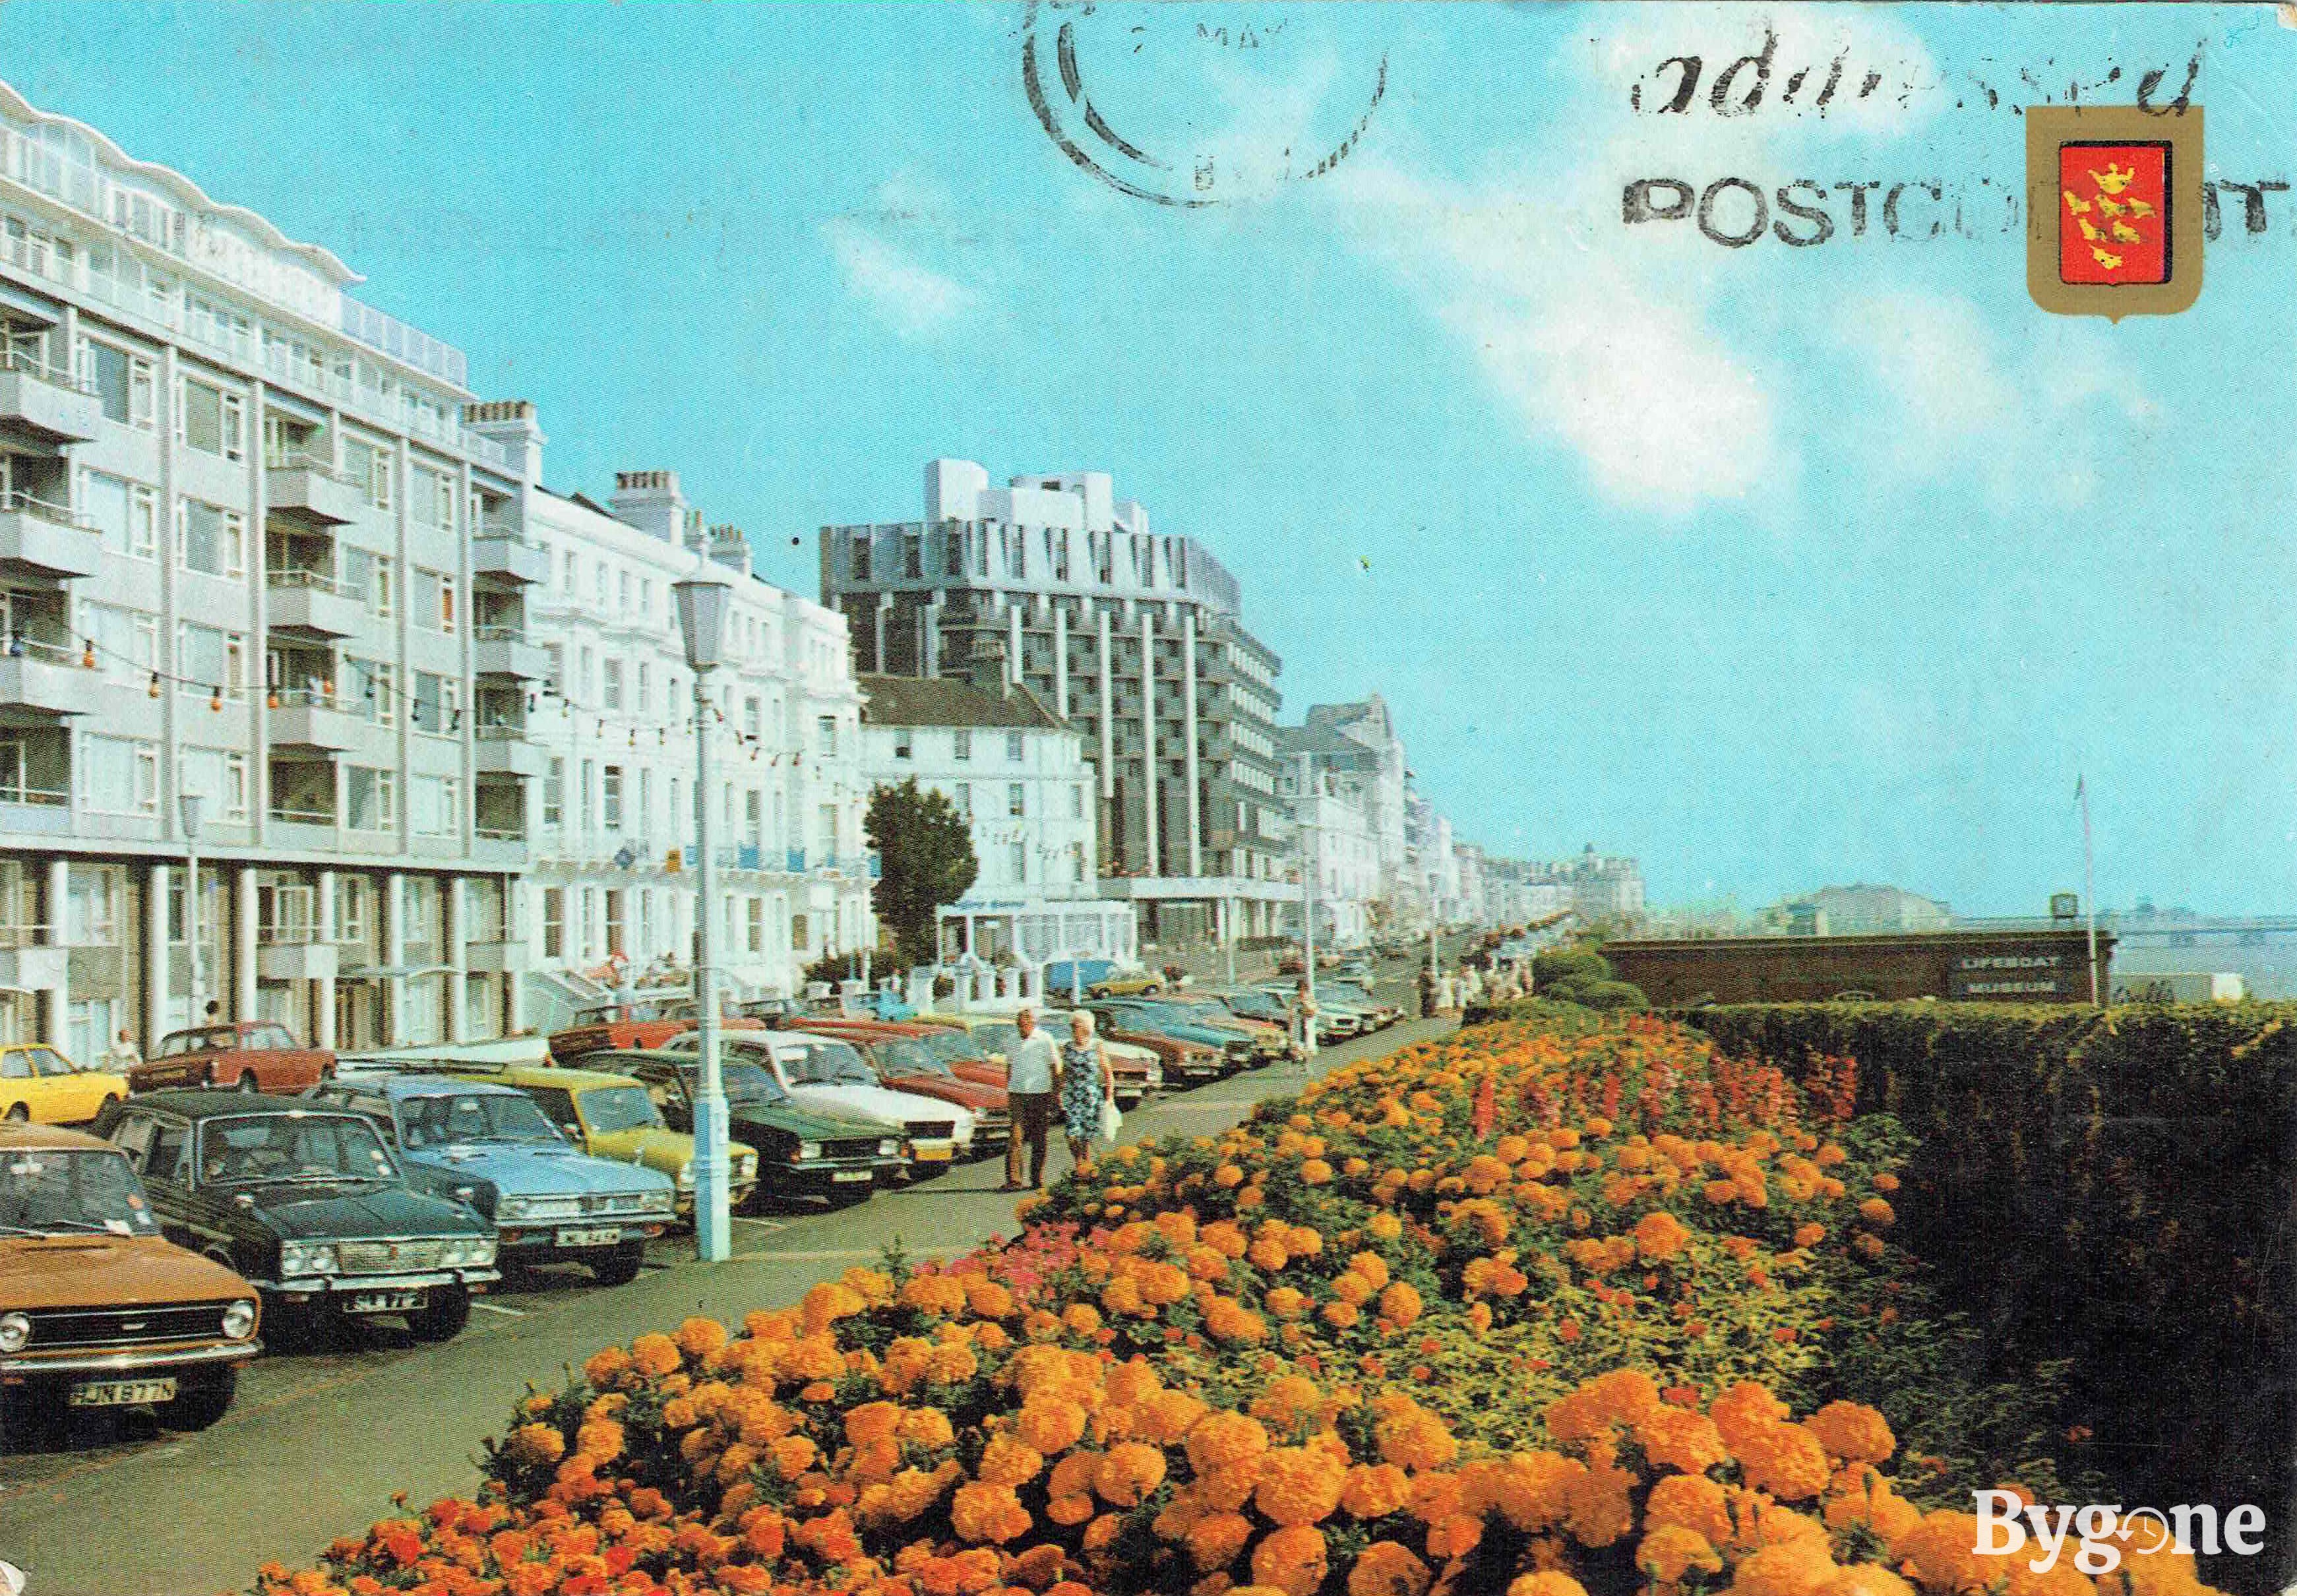 A white middle-aged couple are walking hand in hand along a seafront parade. There are flats, houses and tall buildings along the left hand side, and a row of colourful cars parked diagonally. Alongside the pavement to the centre right, a flower bed of glorious orange marigolds are blooming, and the sky is painted a soft pale blue.